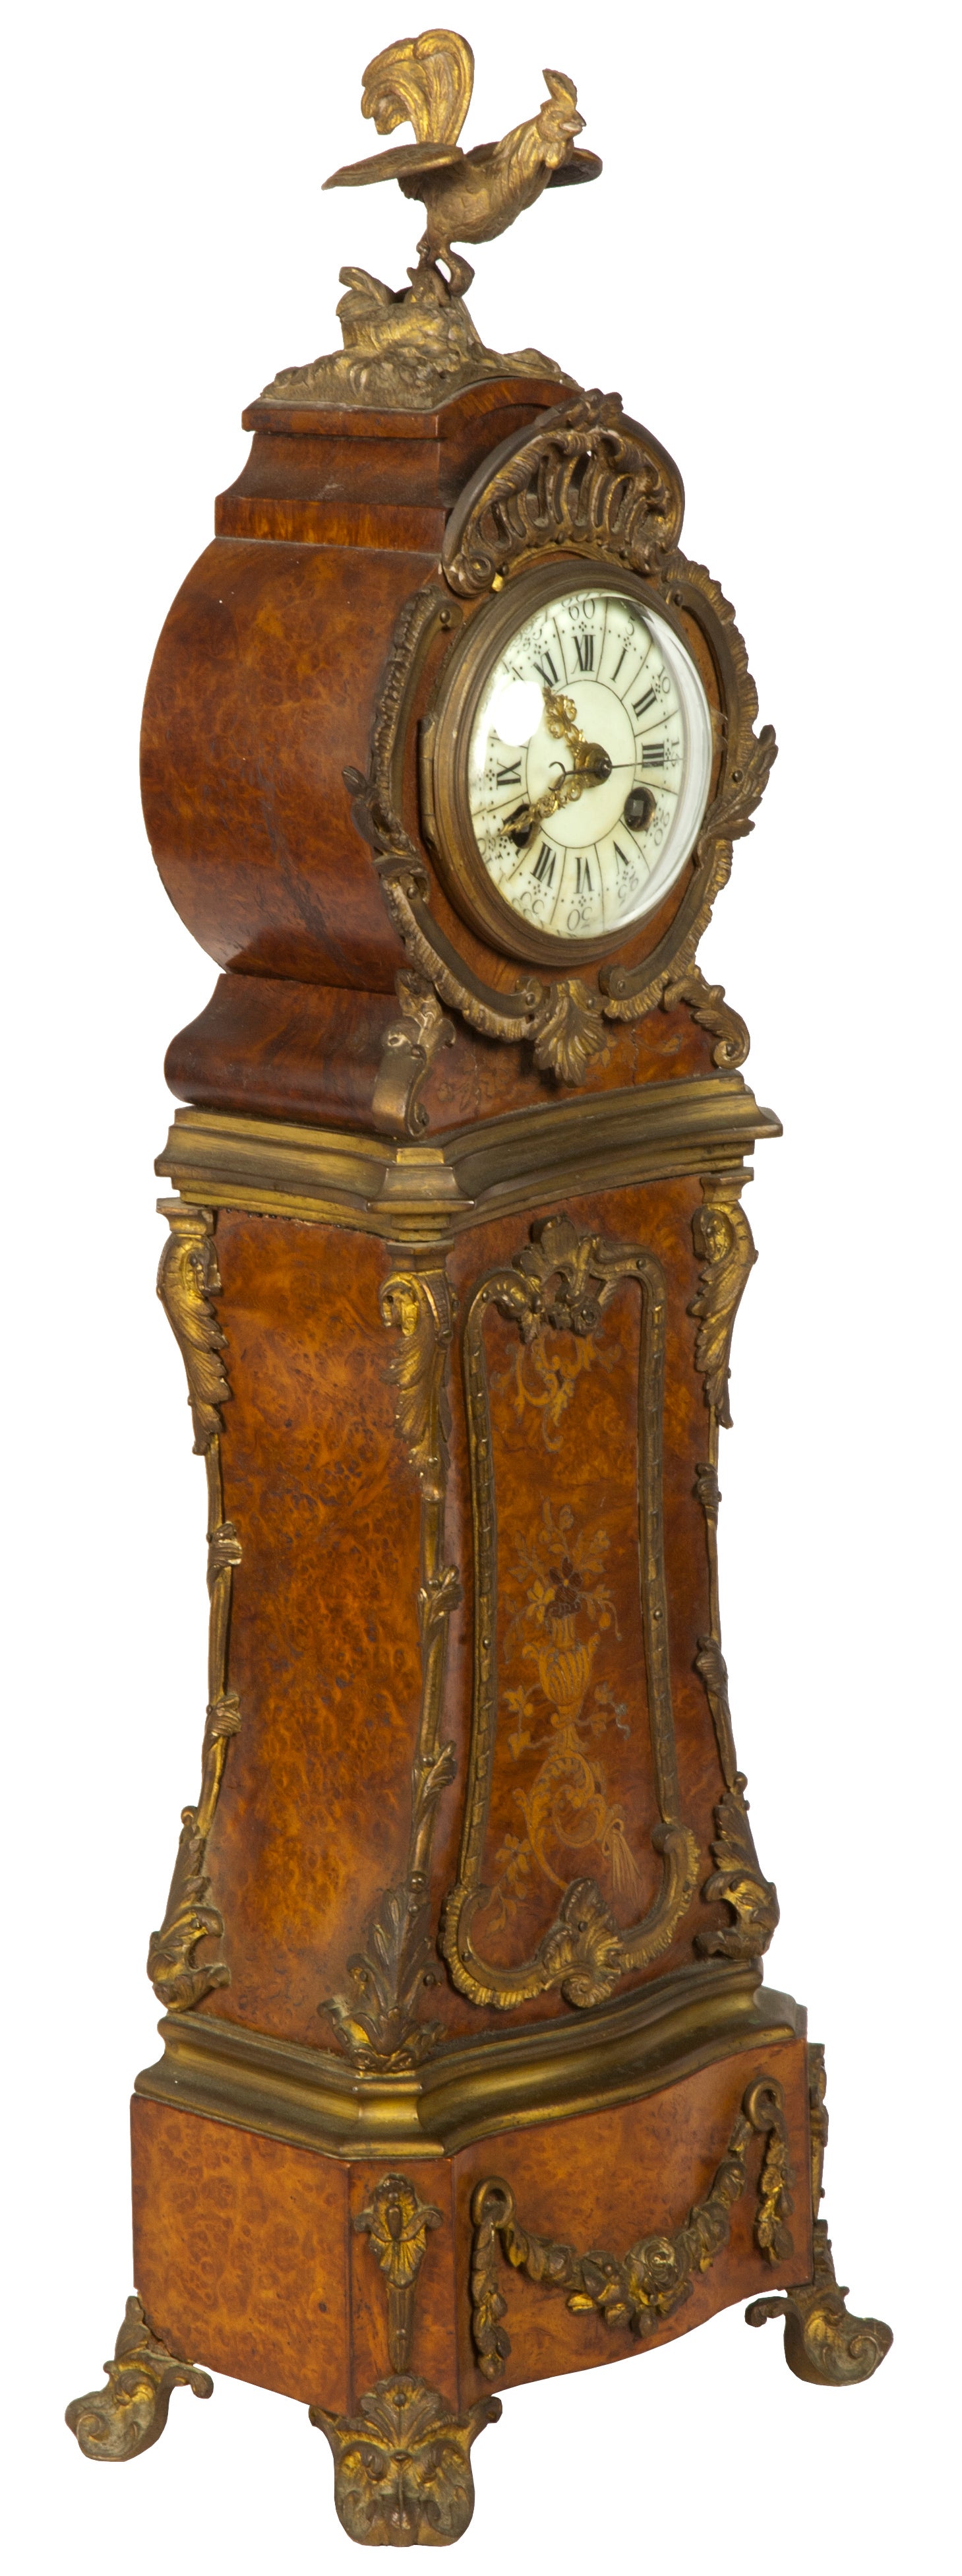 Fine Miniature Ormolu-Mounted, Burled Mantel Clock with Pagoda Top and Rooster